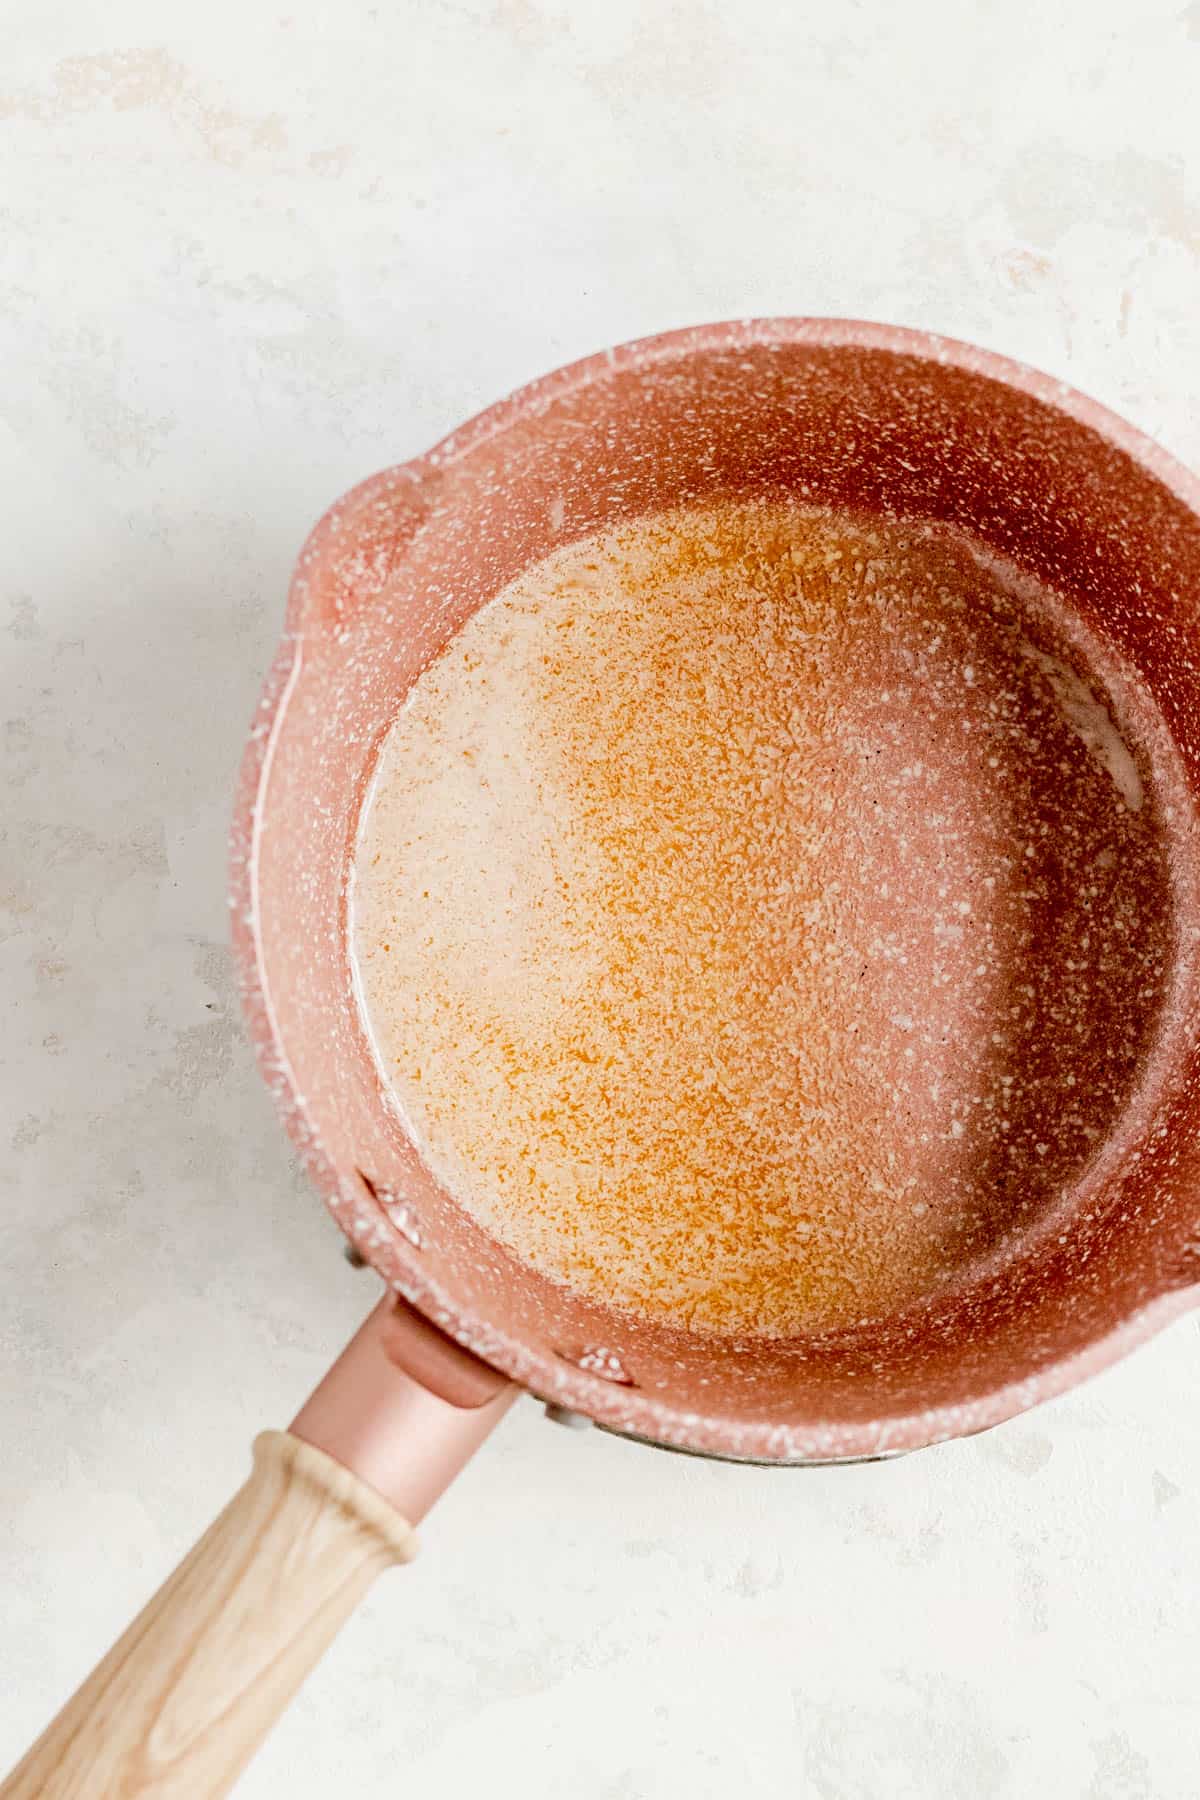 melted butter in a copper pot with white paint flecks and a wooden handle